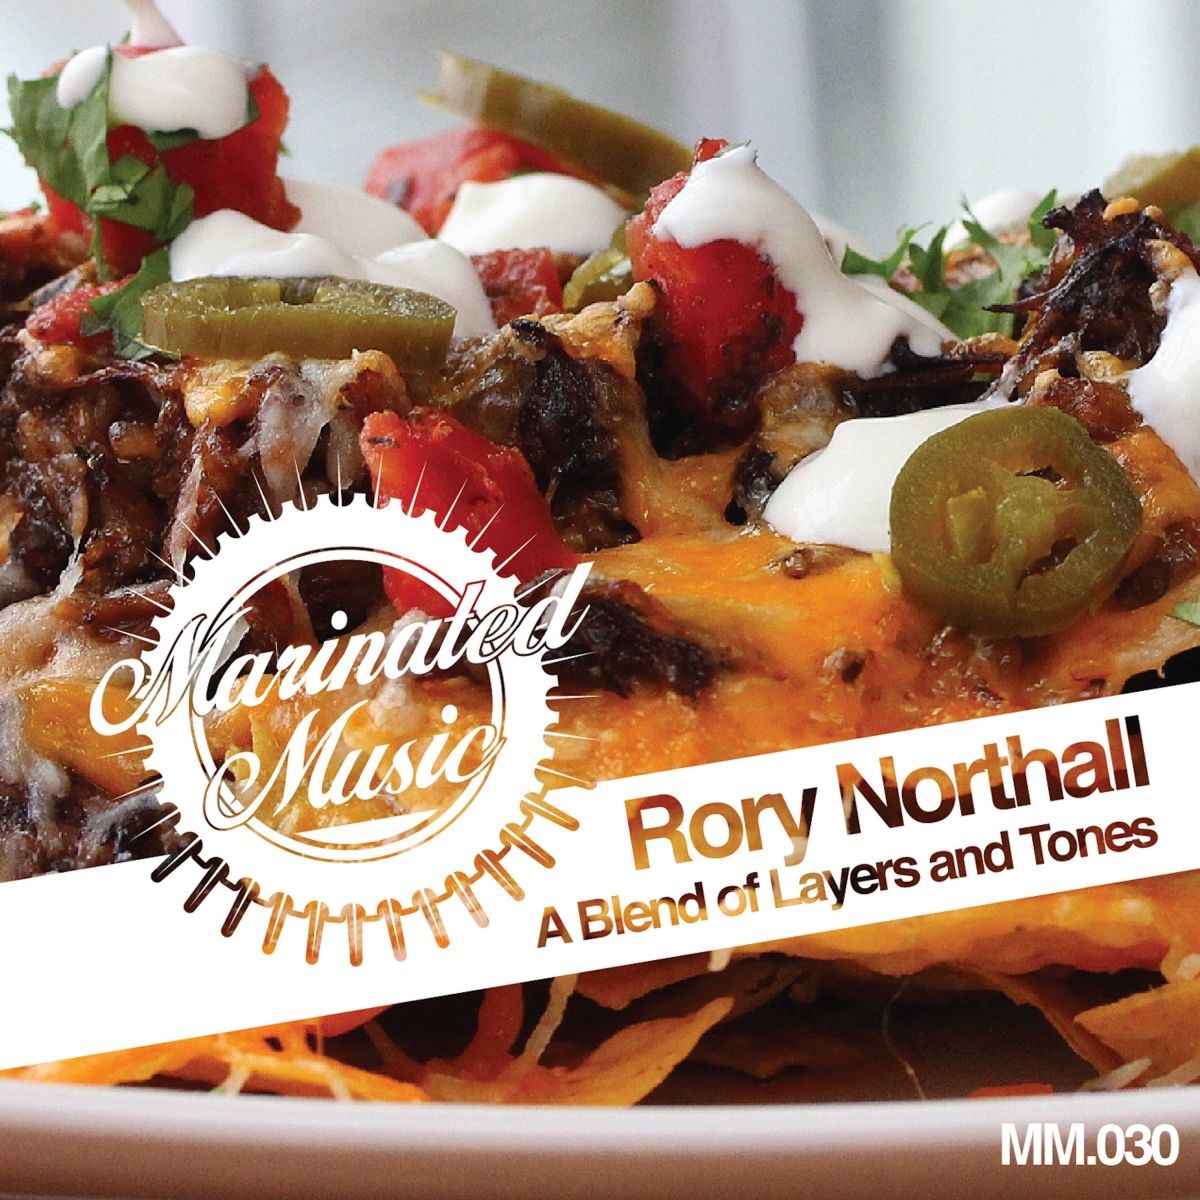 Rory Northall - A Blend of Layers and Tones / Marinated Music